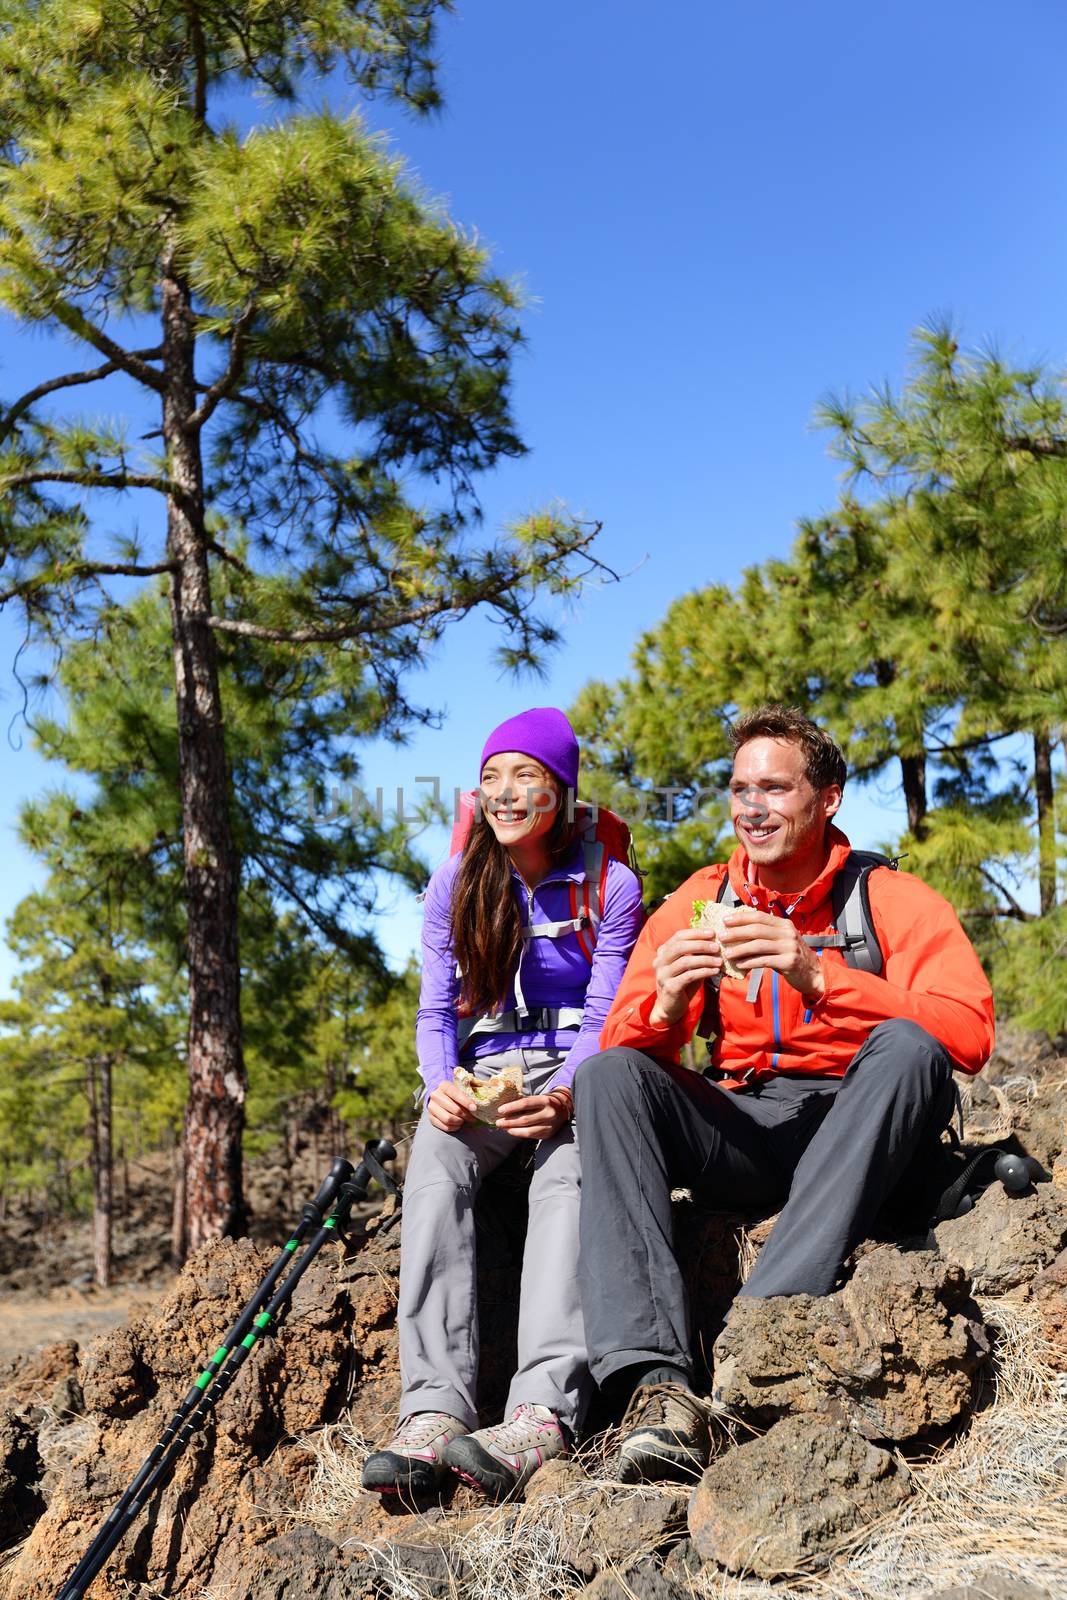 Hikers couple relaxing eating lunch sandwich. Hiking people living active lifestyle in mountain nature. Woman and man hiker sitting during hike on volcano Teide, Tenerife, Canary Islands, Spain.